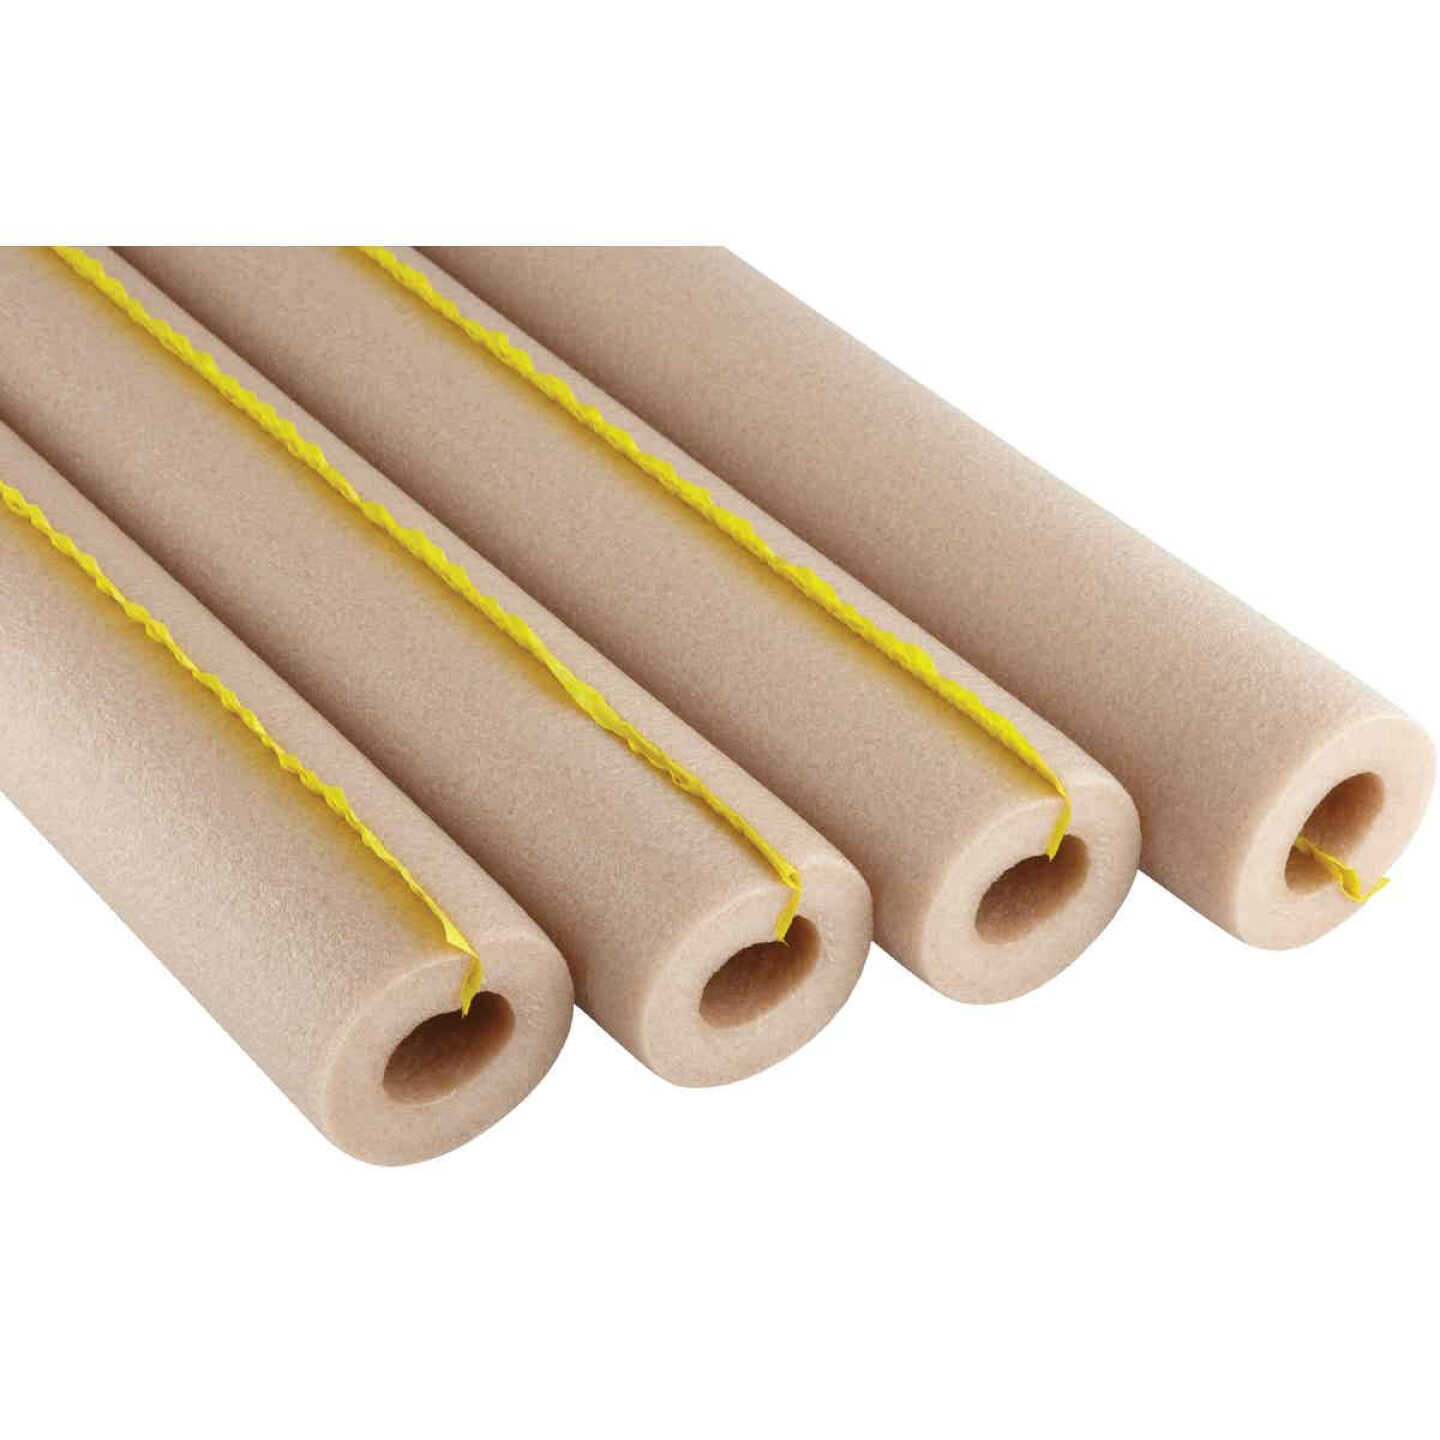 Tundra Plus 5/8 In. Wall Self-Sealing Polyolefin Pipe Insulation Wrap, 1/2  In. x 3 Ft. (4-Pack) - Keough's Paint and Hardware